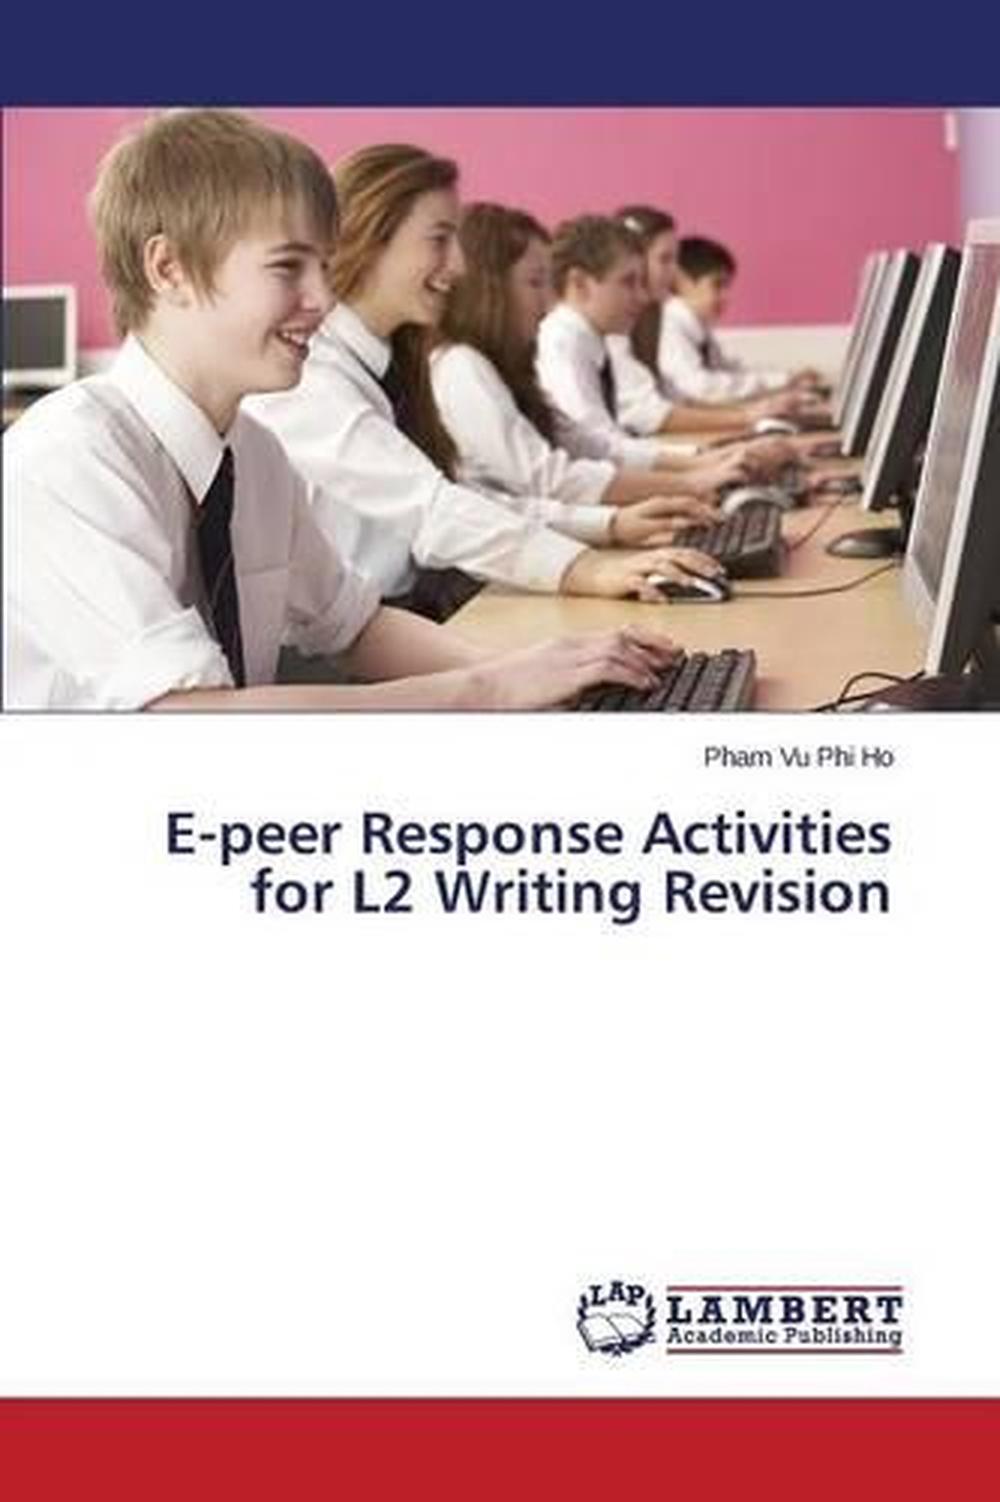 E peer Response Activities For L2 Writing Revision By Ho Pham Vu Phi English P 9783659580154